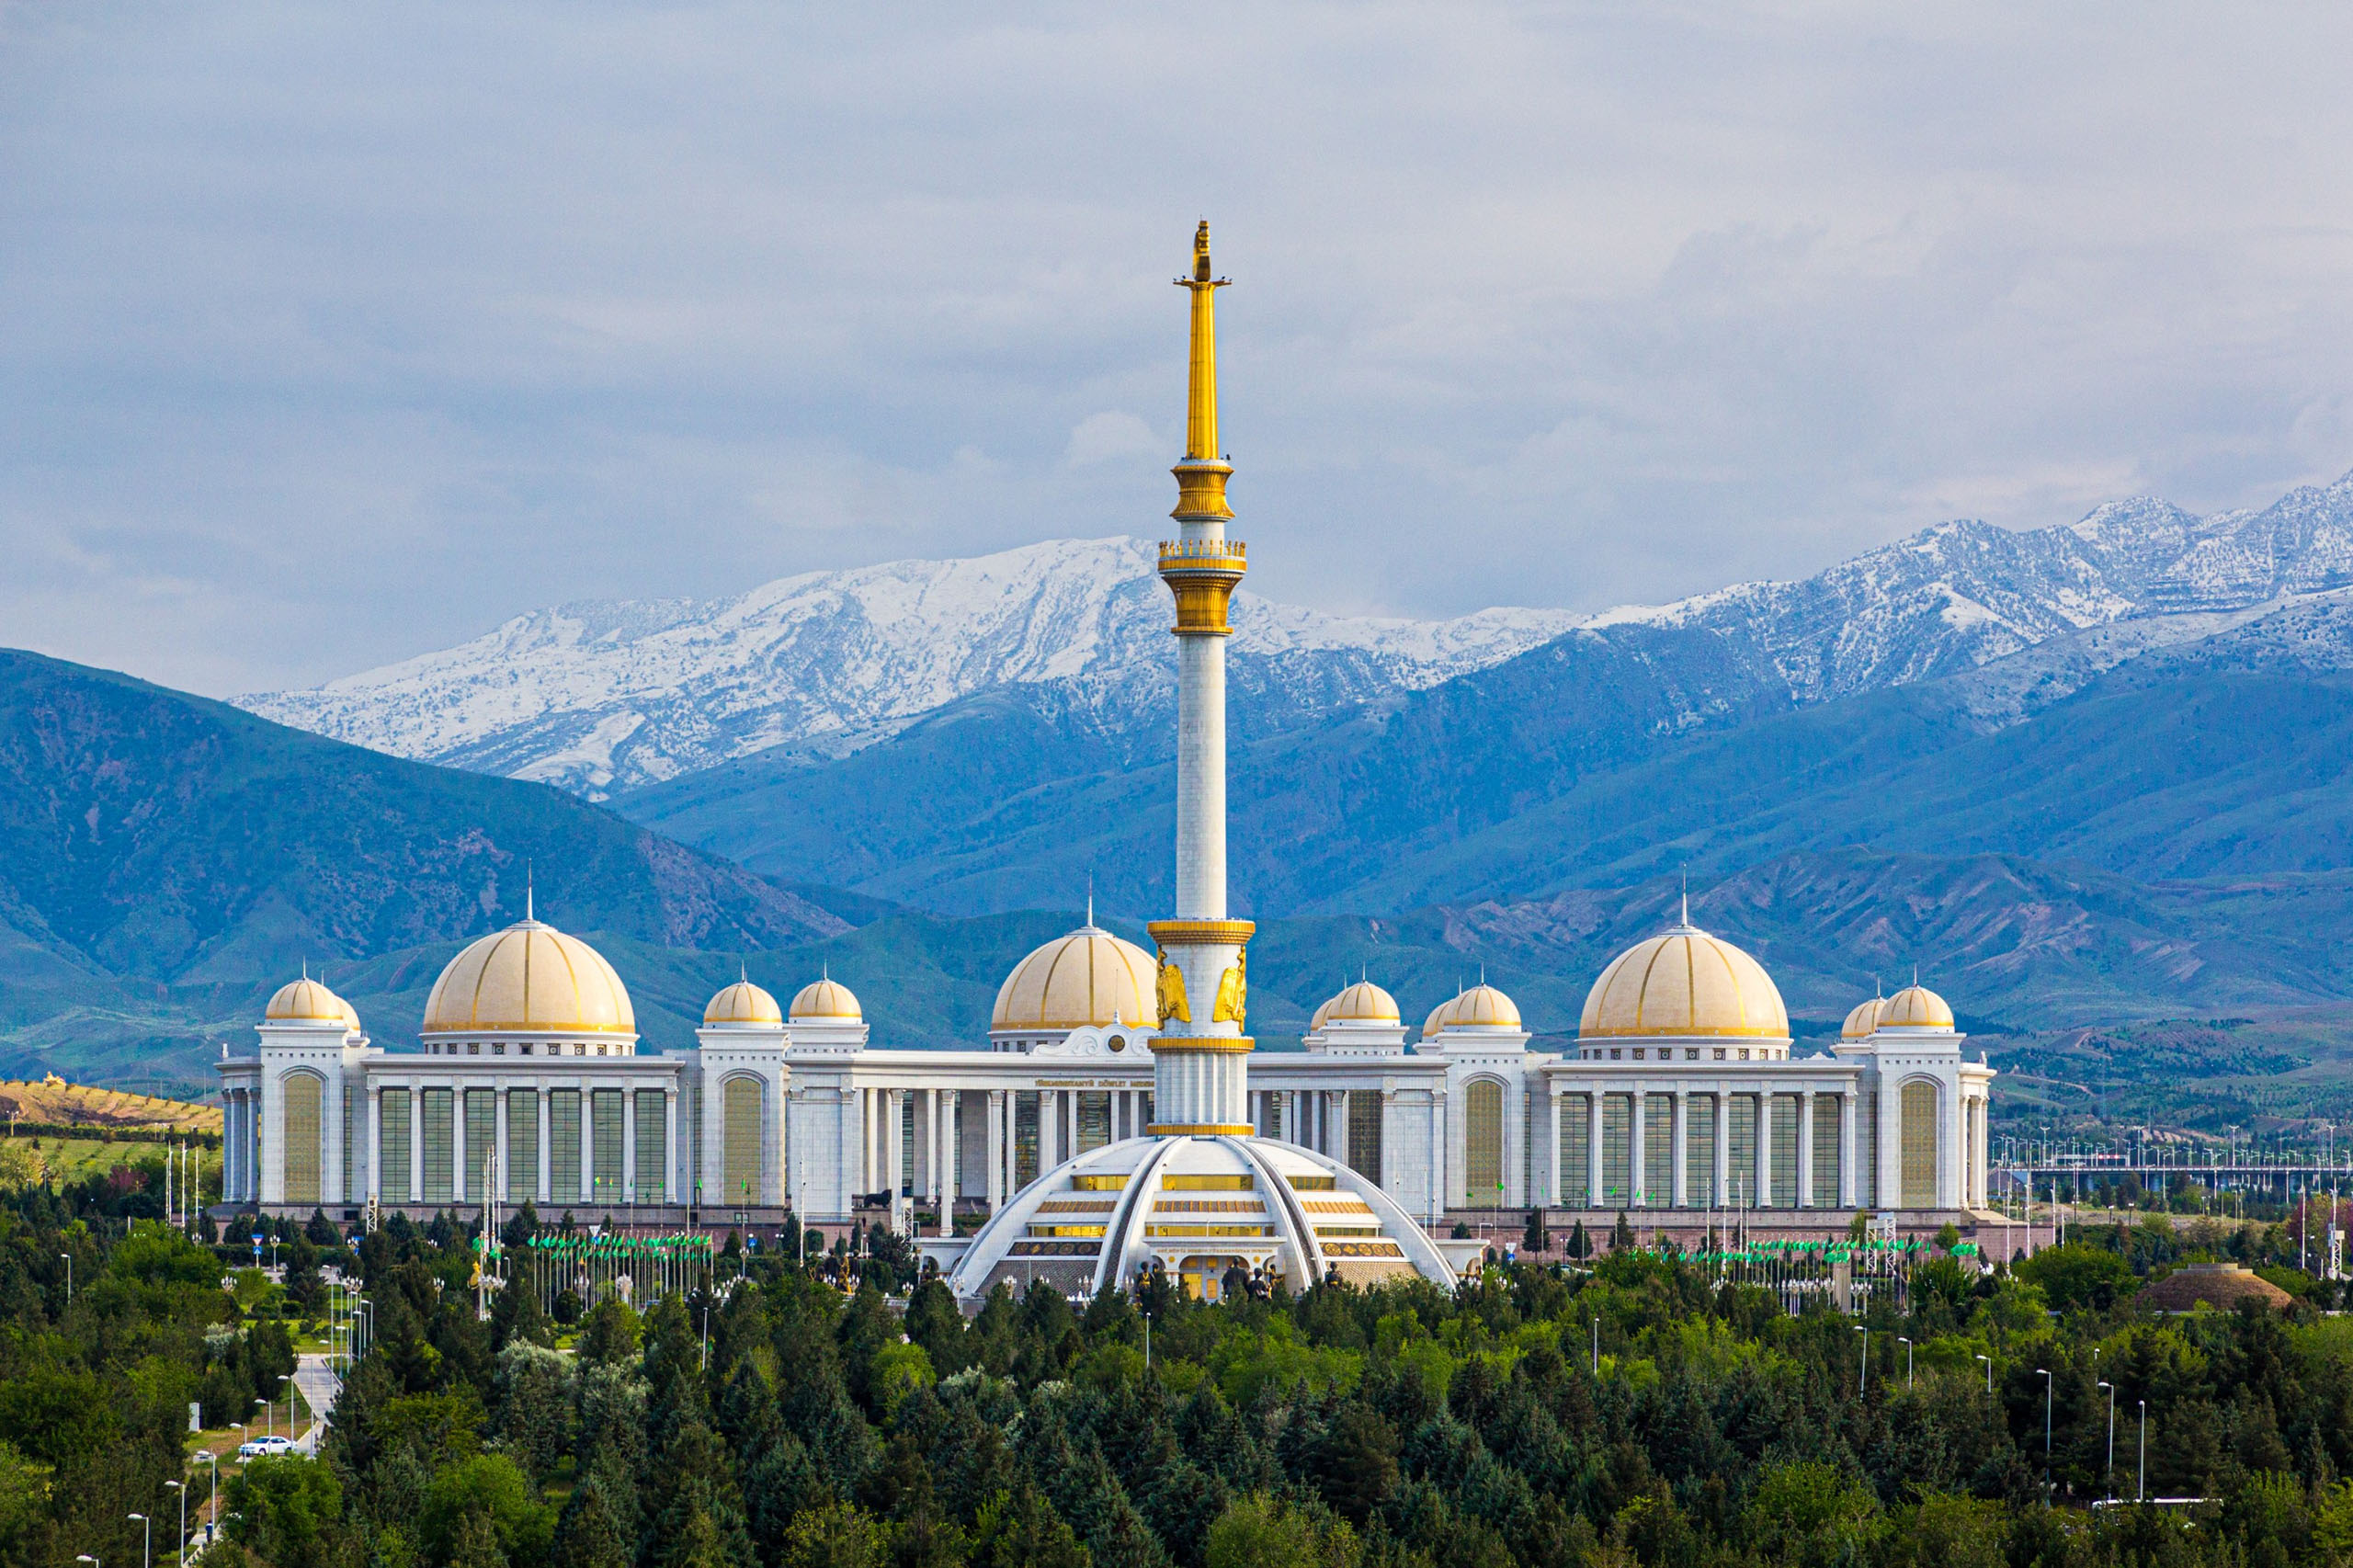 Independence monument and National Library in Ashgabat, Turkmenistan